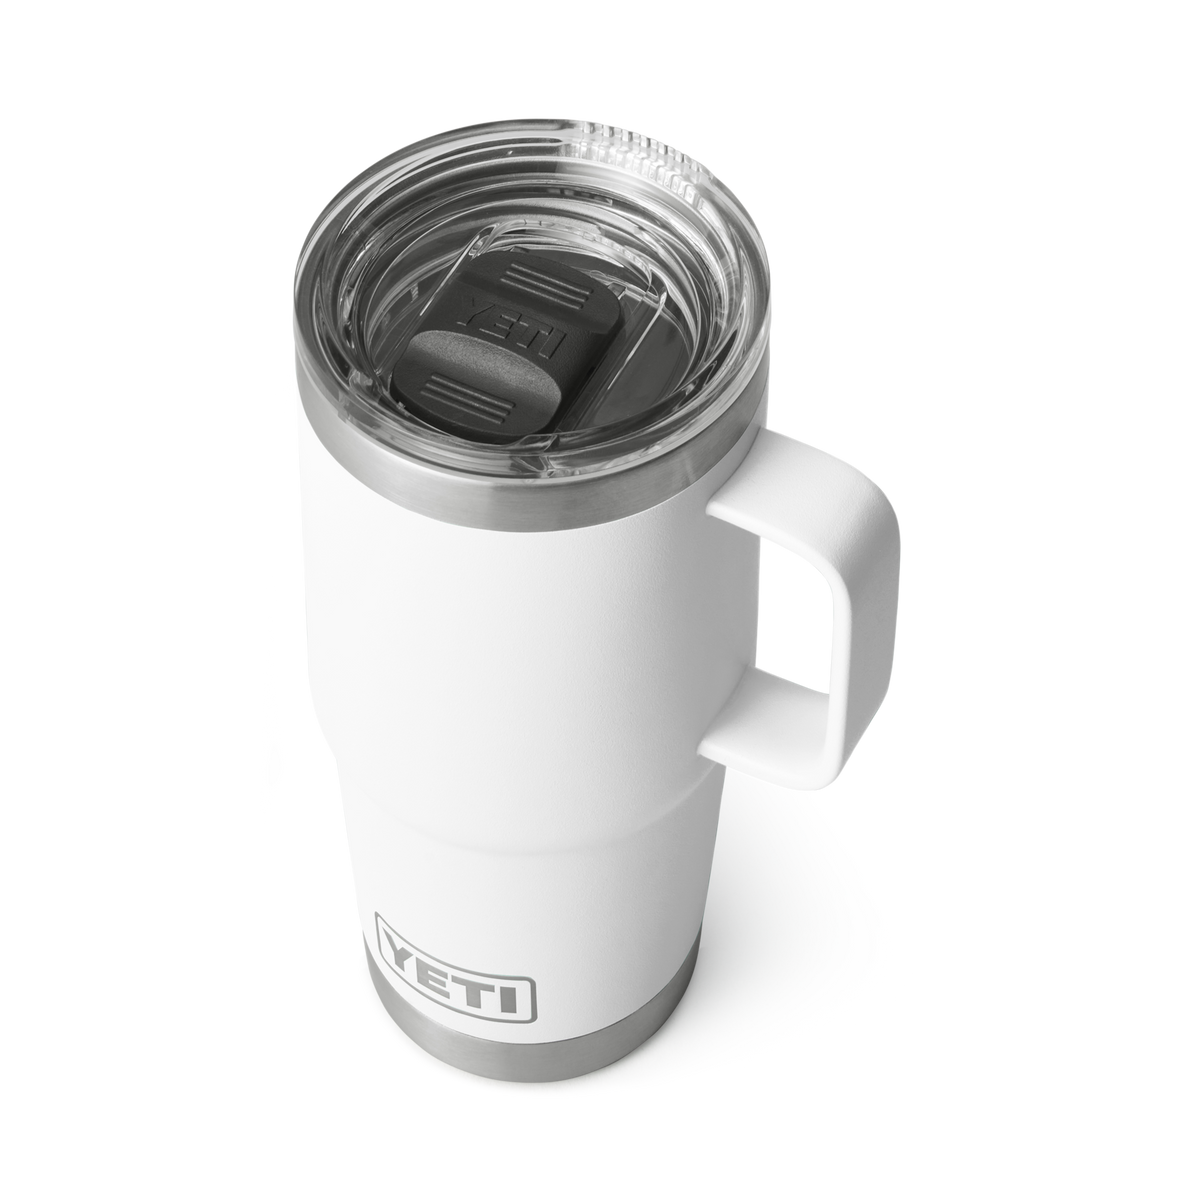 https://www.leadapparel.shop/wp-content/uploads/1690/91/get-your-hands-on-the-newest-collection-of-yeti-rambler-20-oz-travel-mug-with-stronghold-lid-white-yeti_1.png